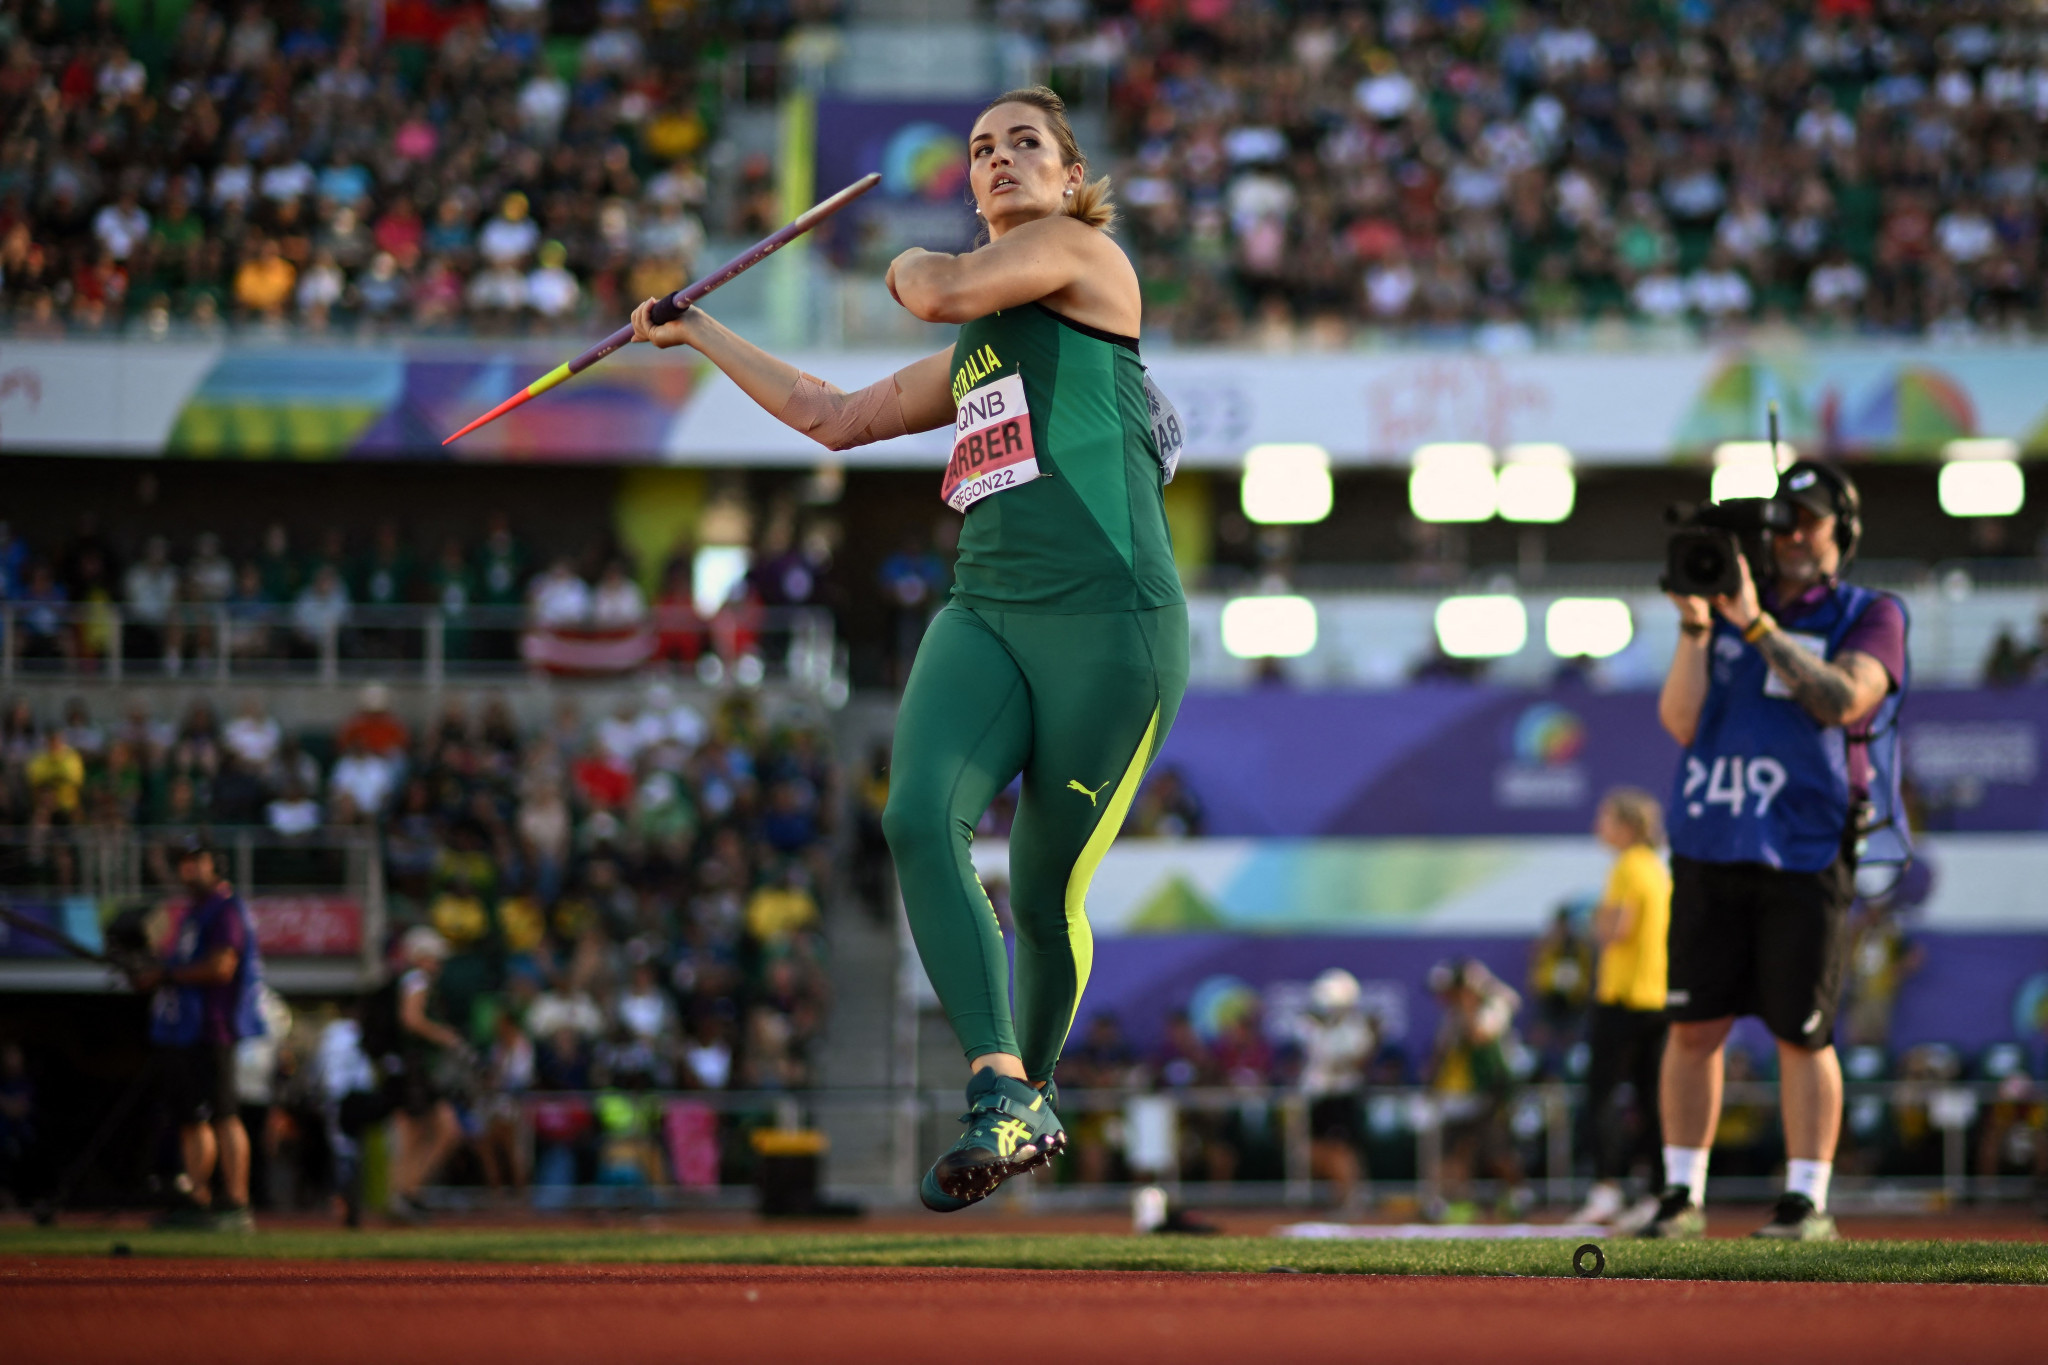 Javelin thrower Kelsey-Lee Barber is expected to compete in Birmingham despite testing positive for COVID-19 ©Getty Images